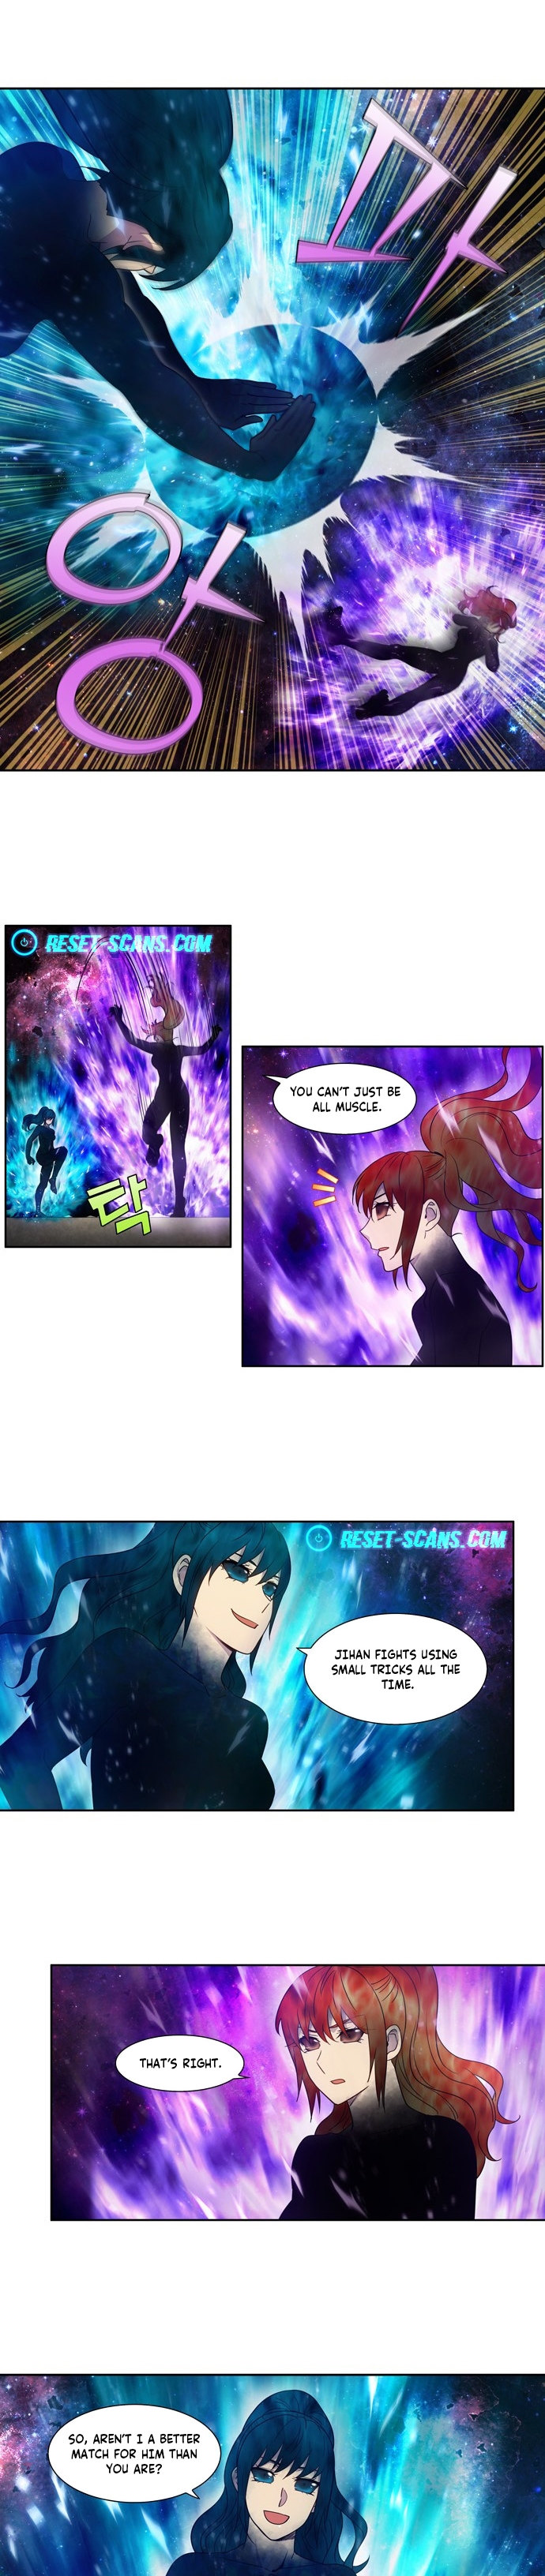 The Gamer - Chapter 412 Page 3